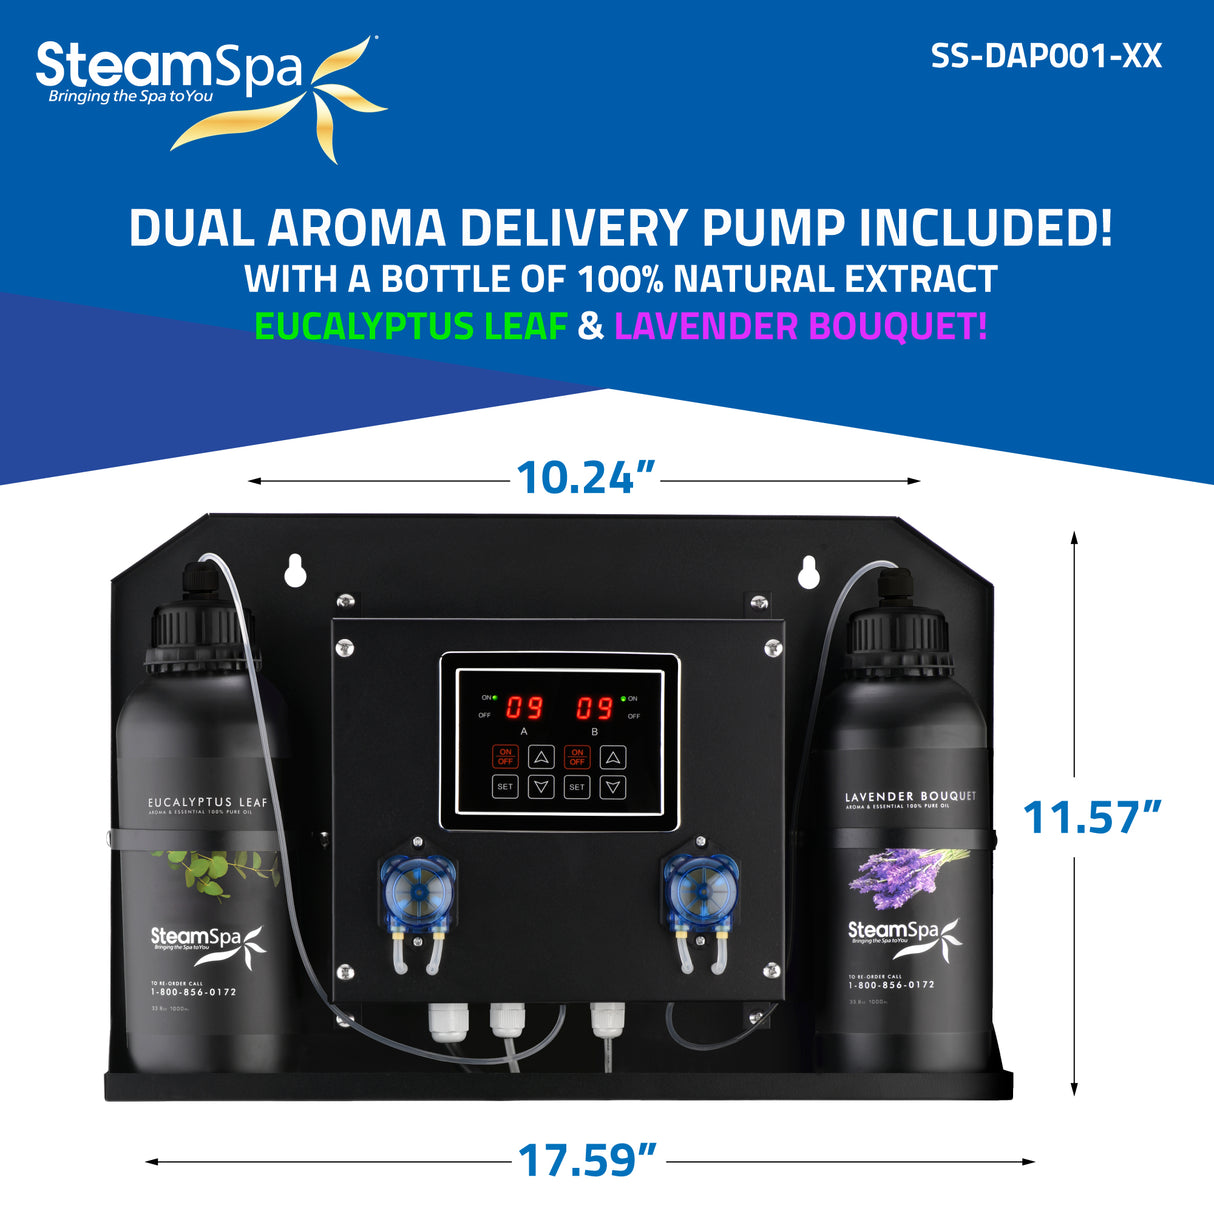 Steam Shower Generator Kit System | Brushed Nickel + Self Drain Combo| Dual Bottle Aroma Oil Pump | Enclosure Steamer Sauna Spa Stall Package|Touch Screen Wifi App/Bluetooth Control Panel |9 kW Raven | RVB900BN-ADP RVB900BN-ADP